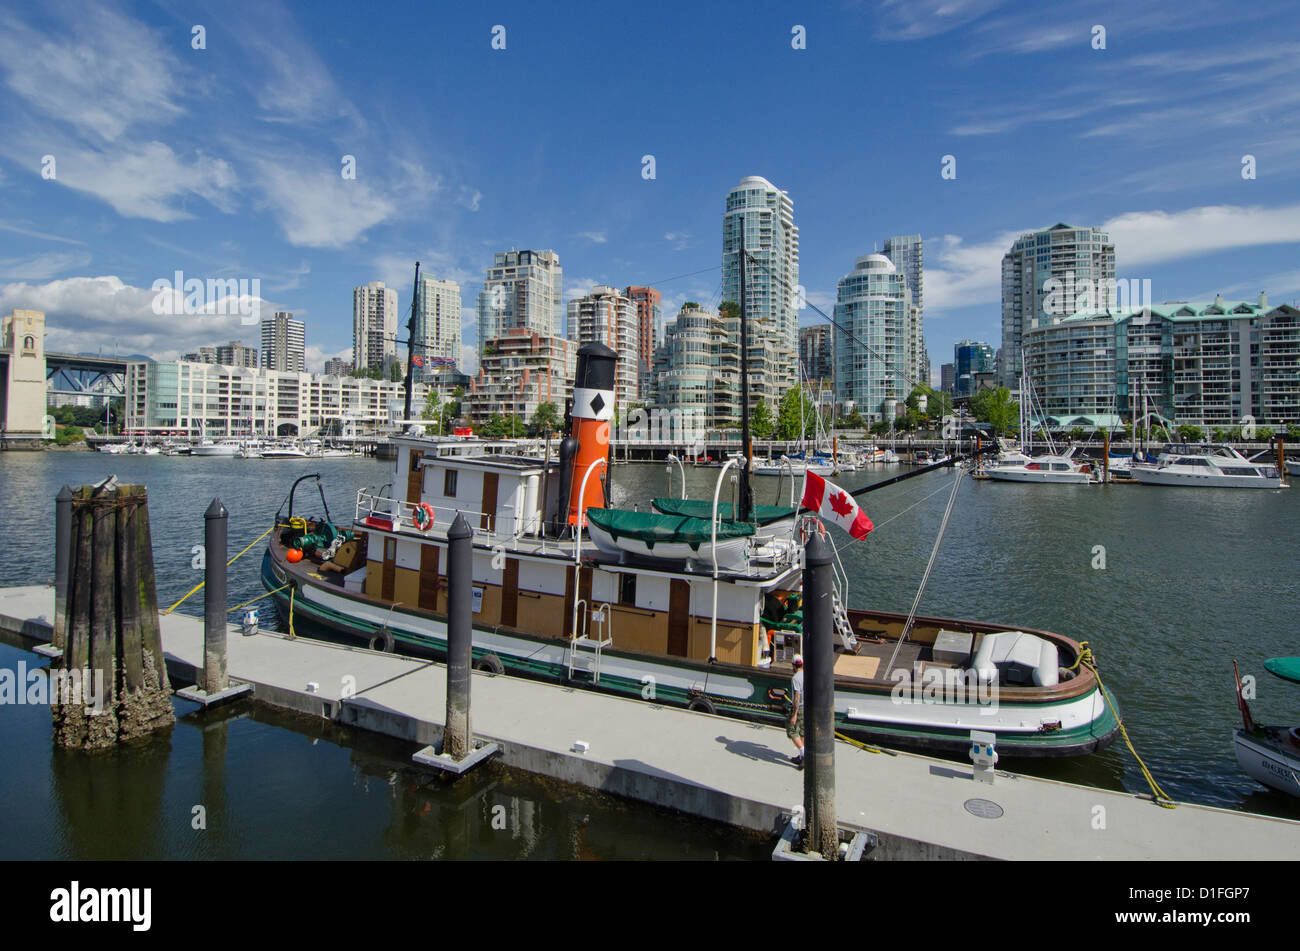 The ultra modern city of Vancouver British Columbia Canada with its seaport and skyscrapers Stock Photo